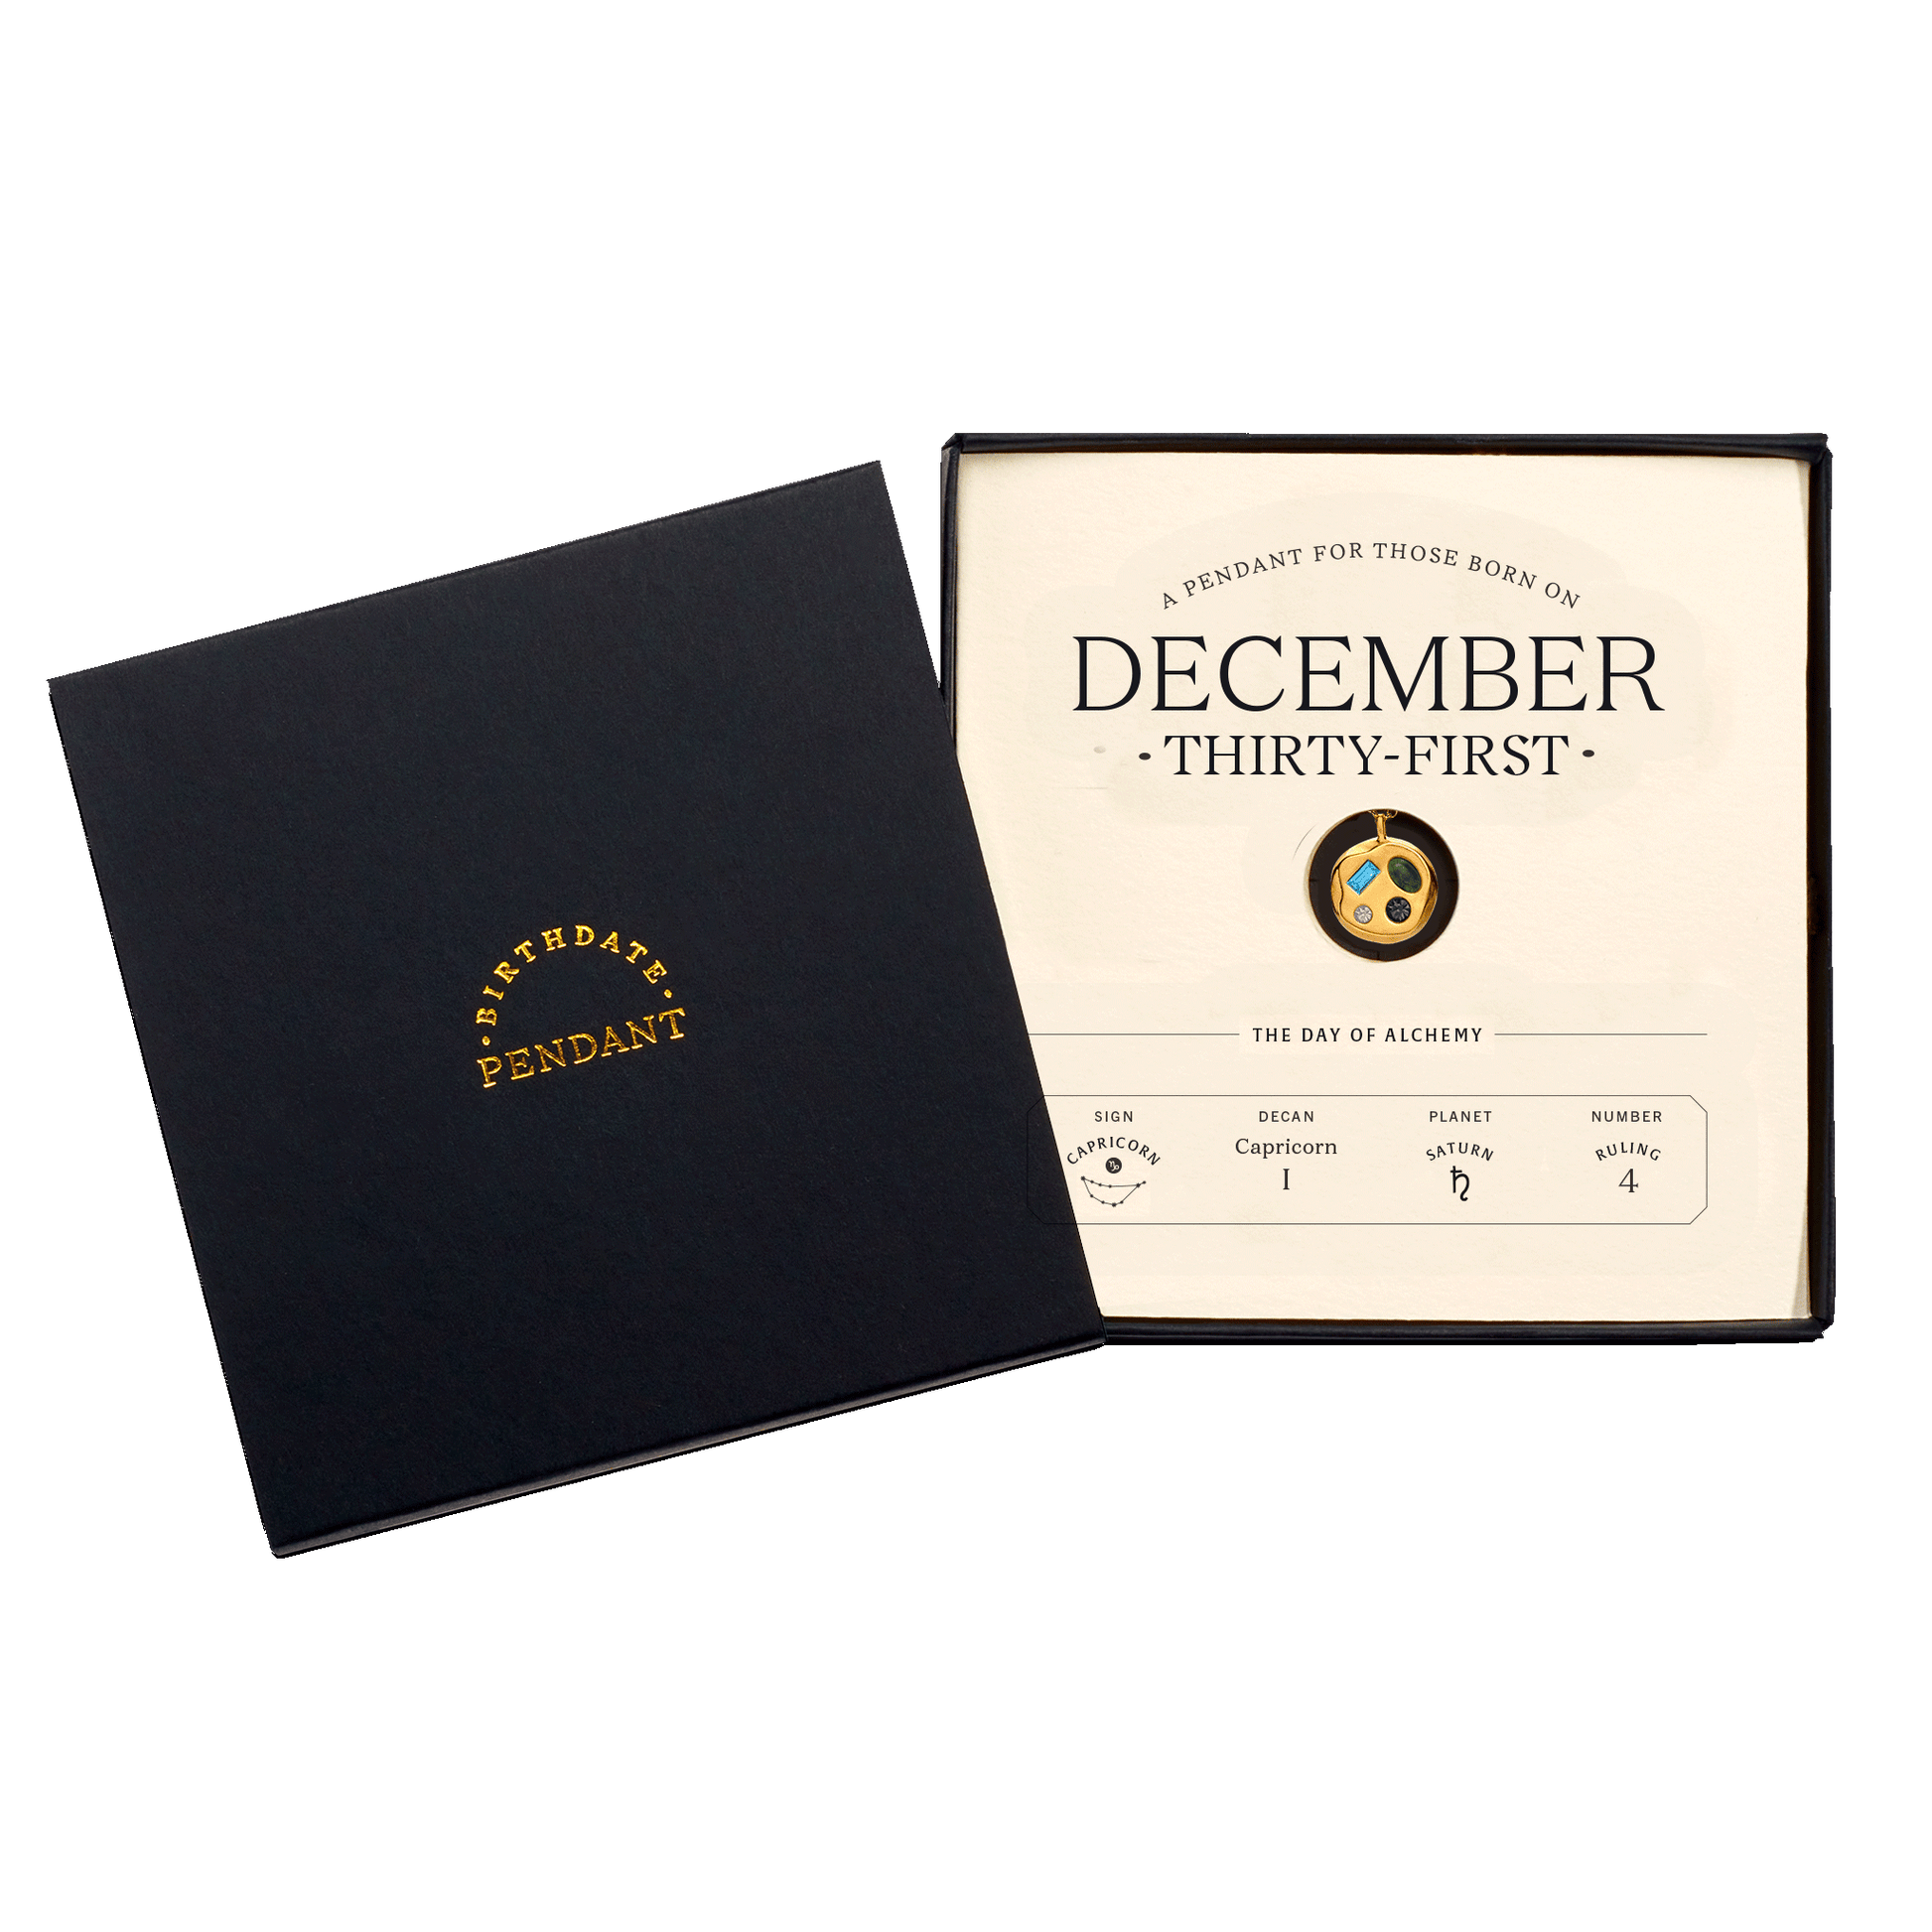 The December Thirty-First Pendant inside its box